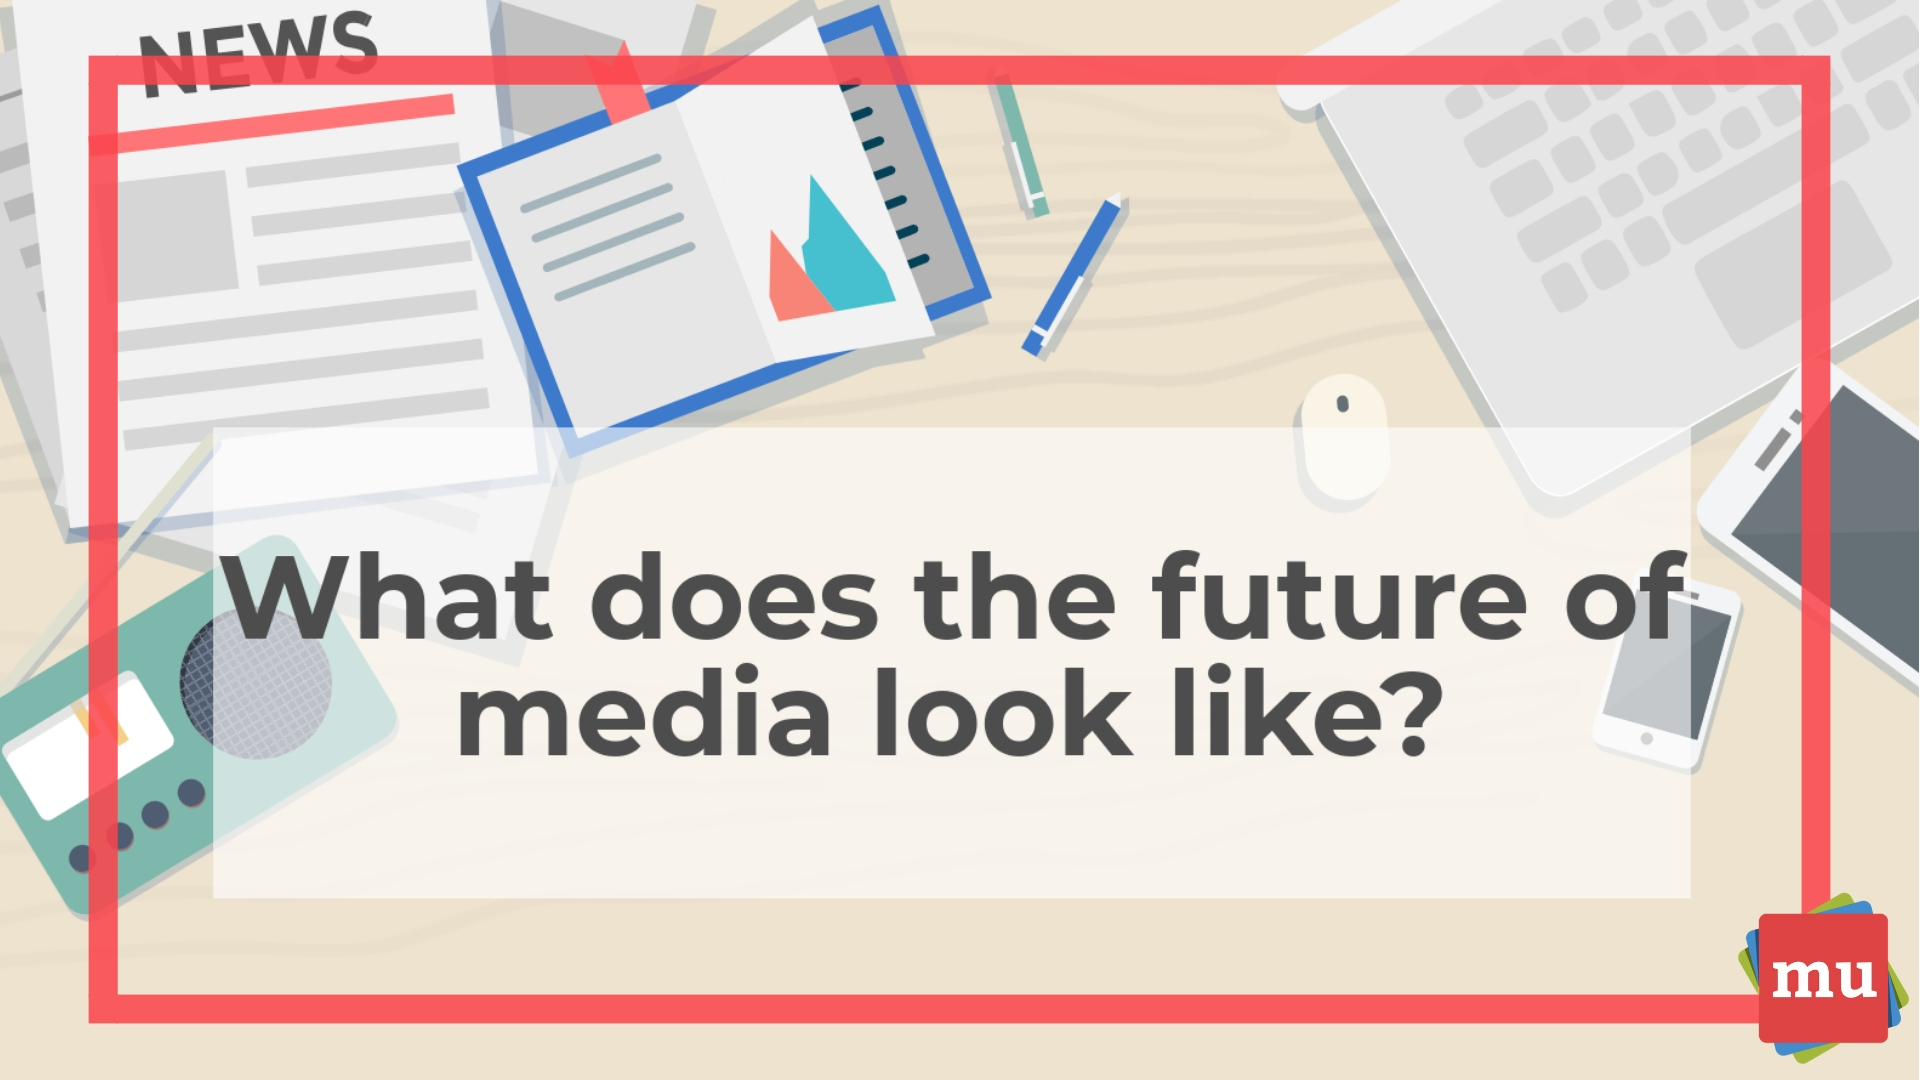 Infographic What Does The Future Of Media Look Like